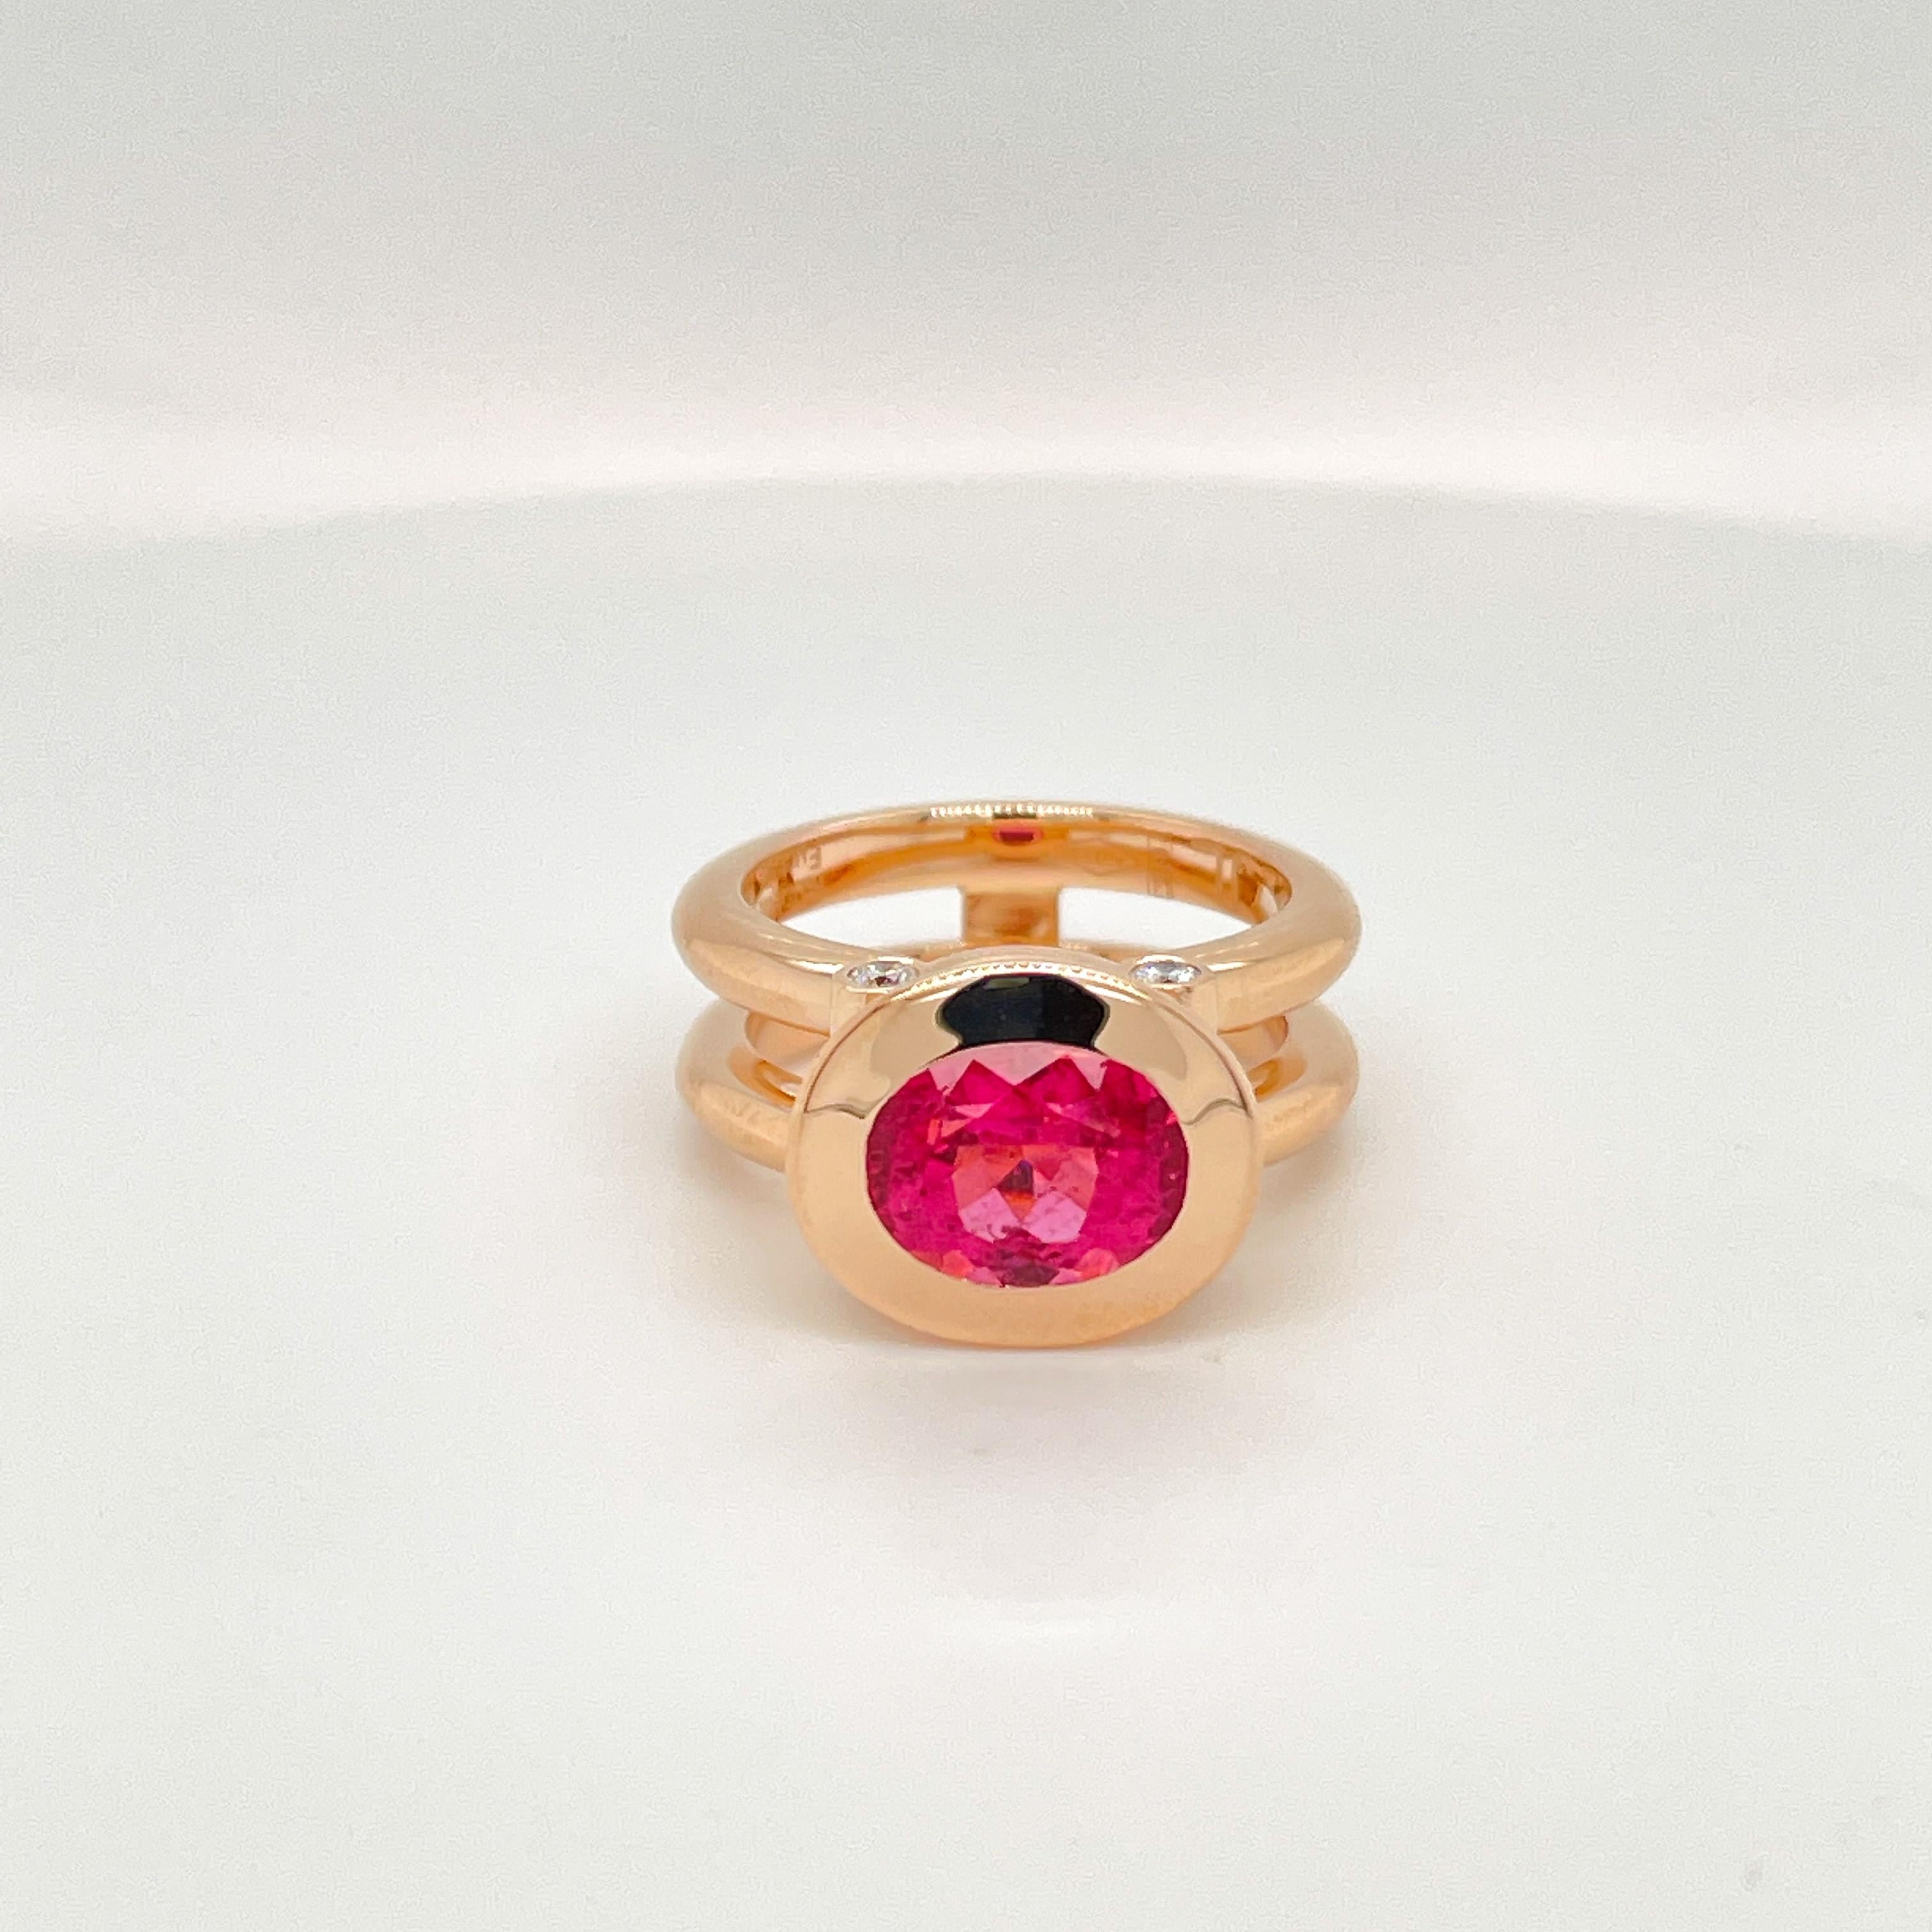 18 Karat Rose Gold Cocktail Ring featuring a 3.8 Carat bright Fuchsia Rubellite stone.

Oval cut measuring 9.8x 8.5mm.
The Fuchsia Rubellite is supported by 4 VS1 G diamonds weighing 0,20 ct.

This design is one of Jochen Leen's first designs and is